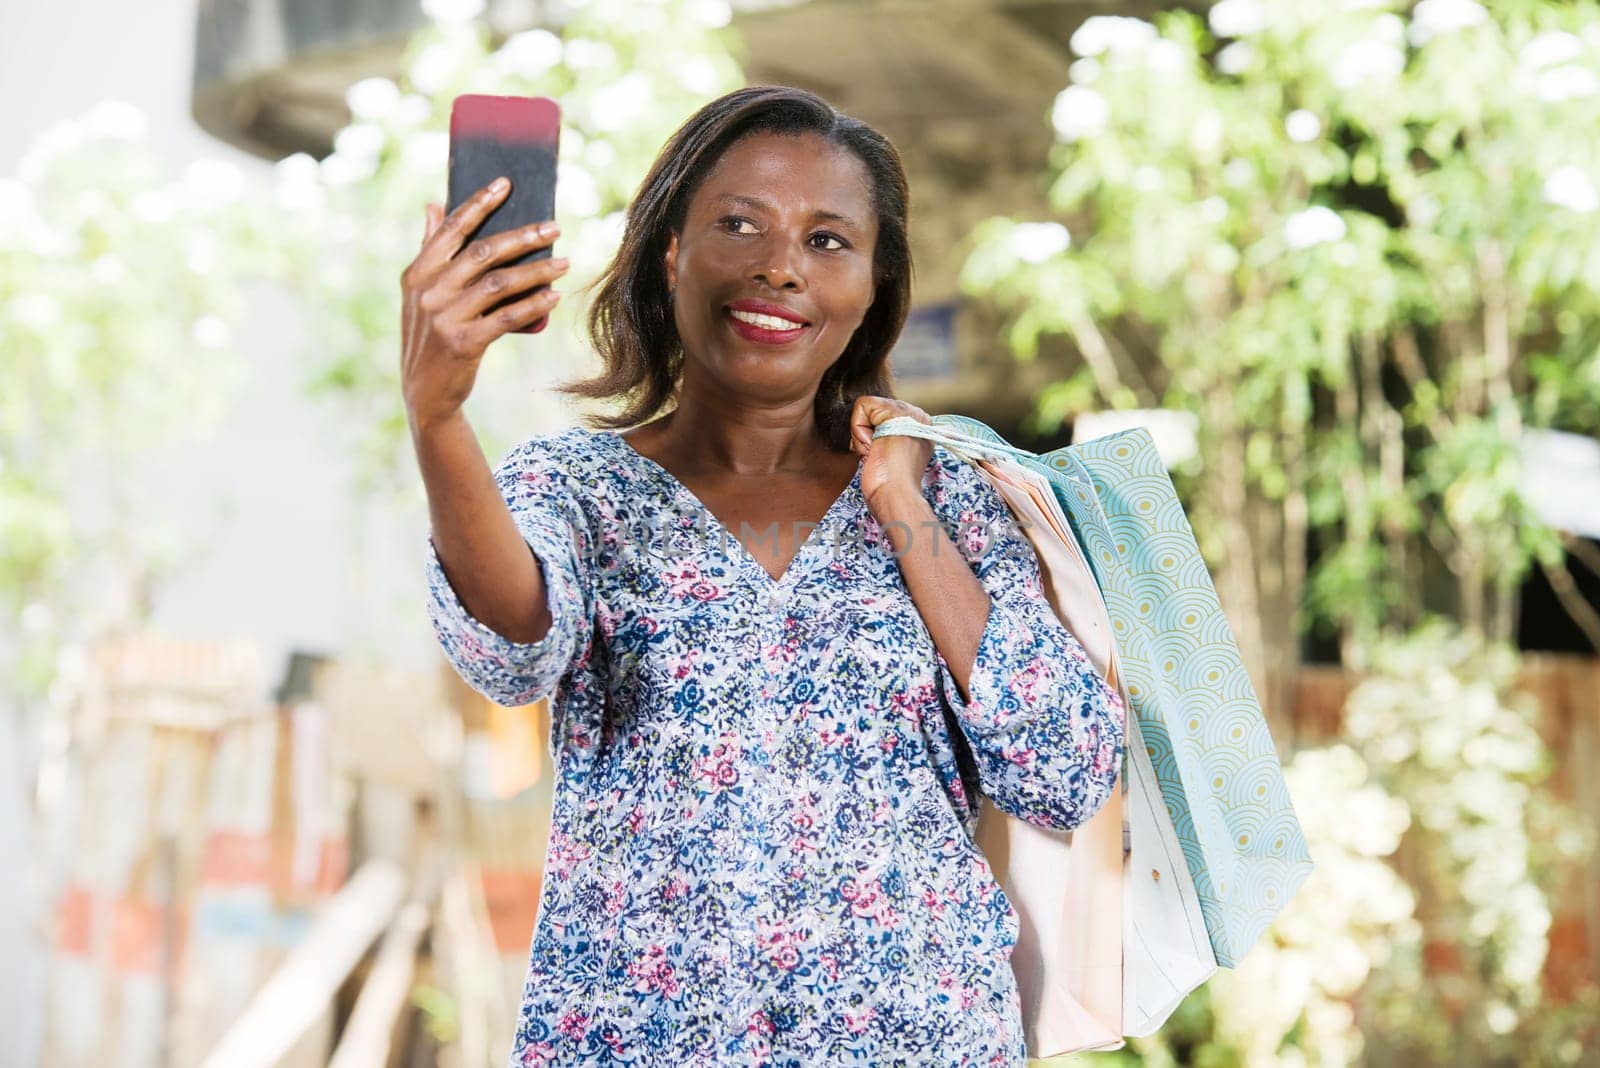 young woman standing outdoors after shopping looking at mobile phone while smiling.